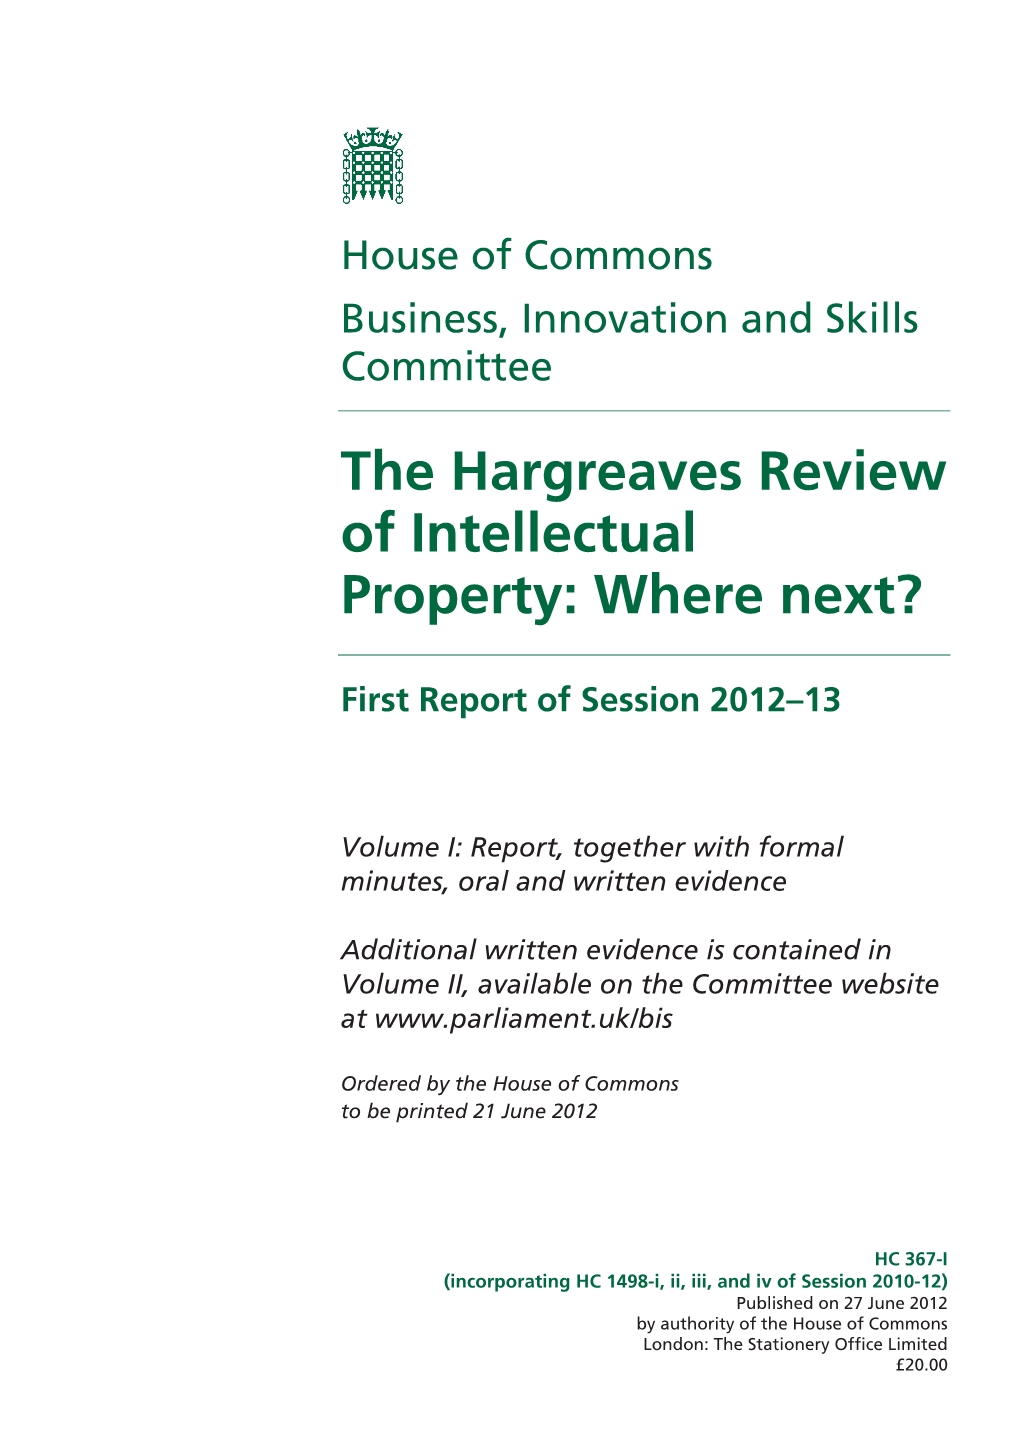 The Hargreaves Review of Intellectual Property: Where Next?